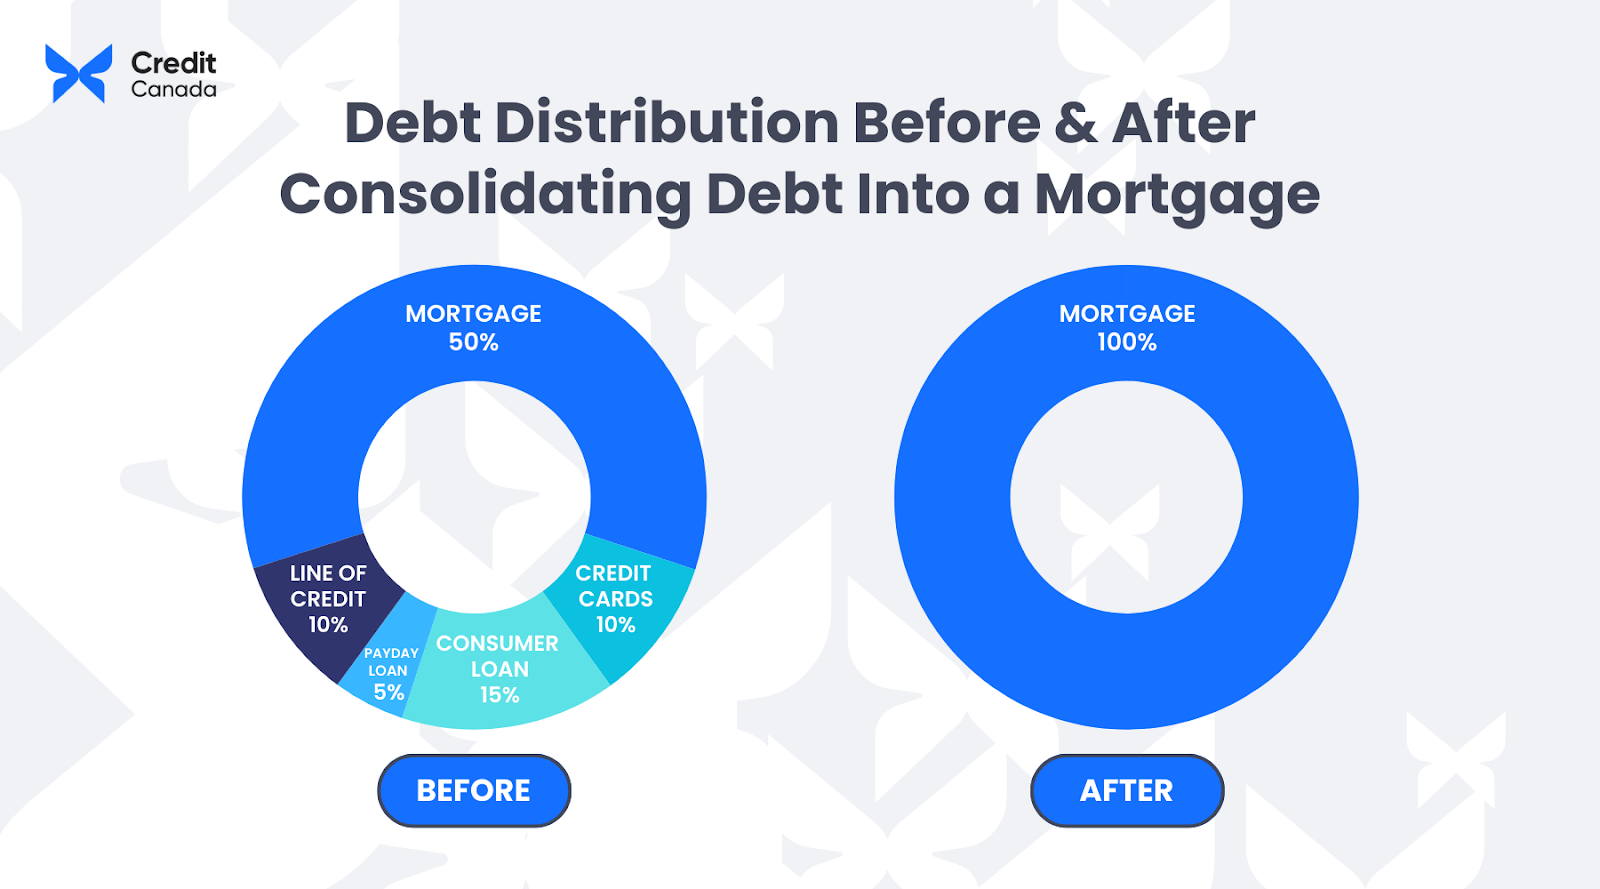 Pie chart showing debt distribution before and after consolidating debt into a mortgage